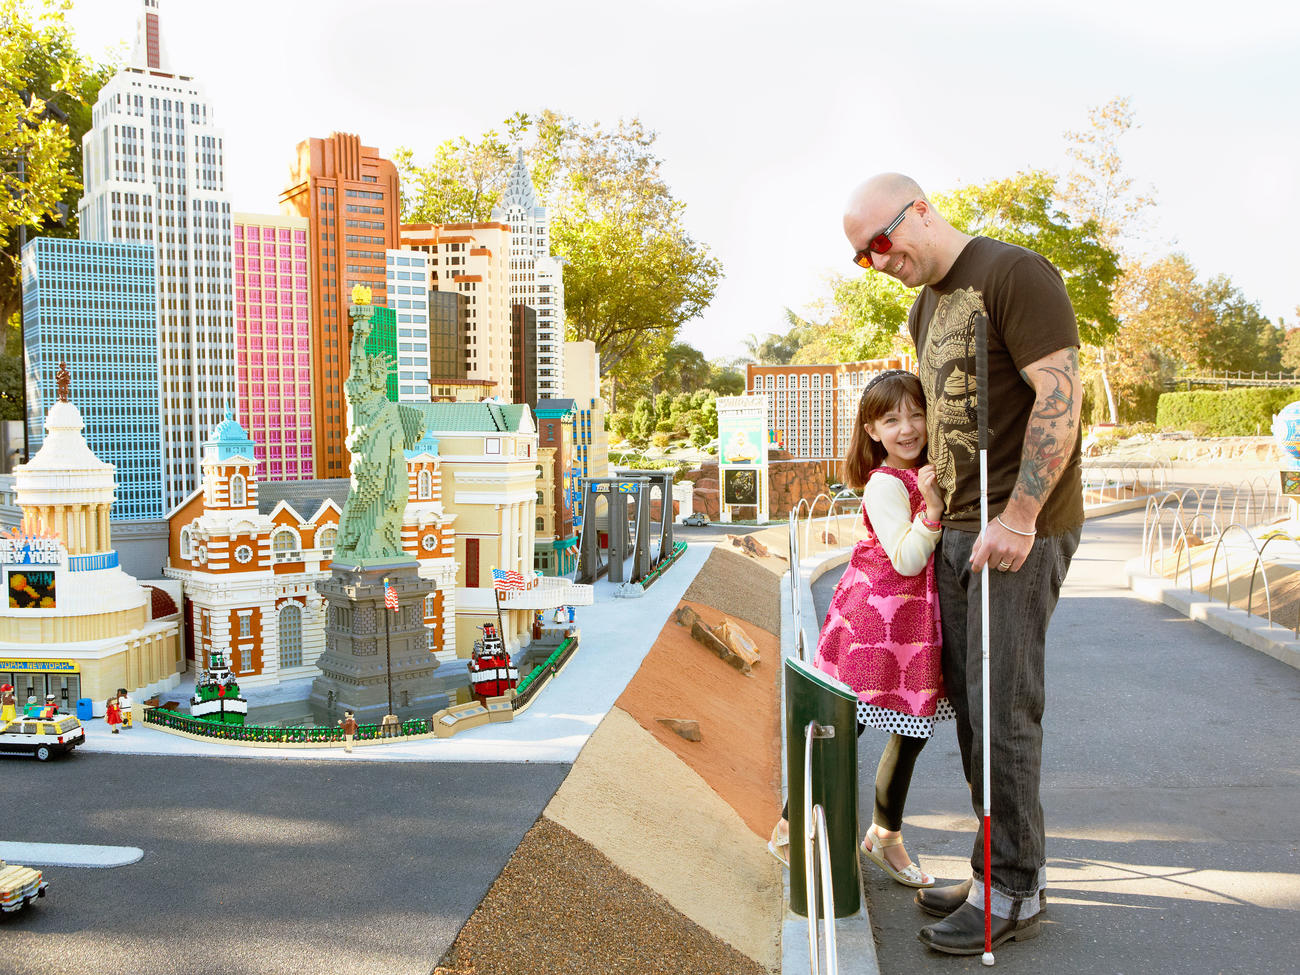 Show and Tell in Legoland